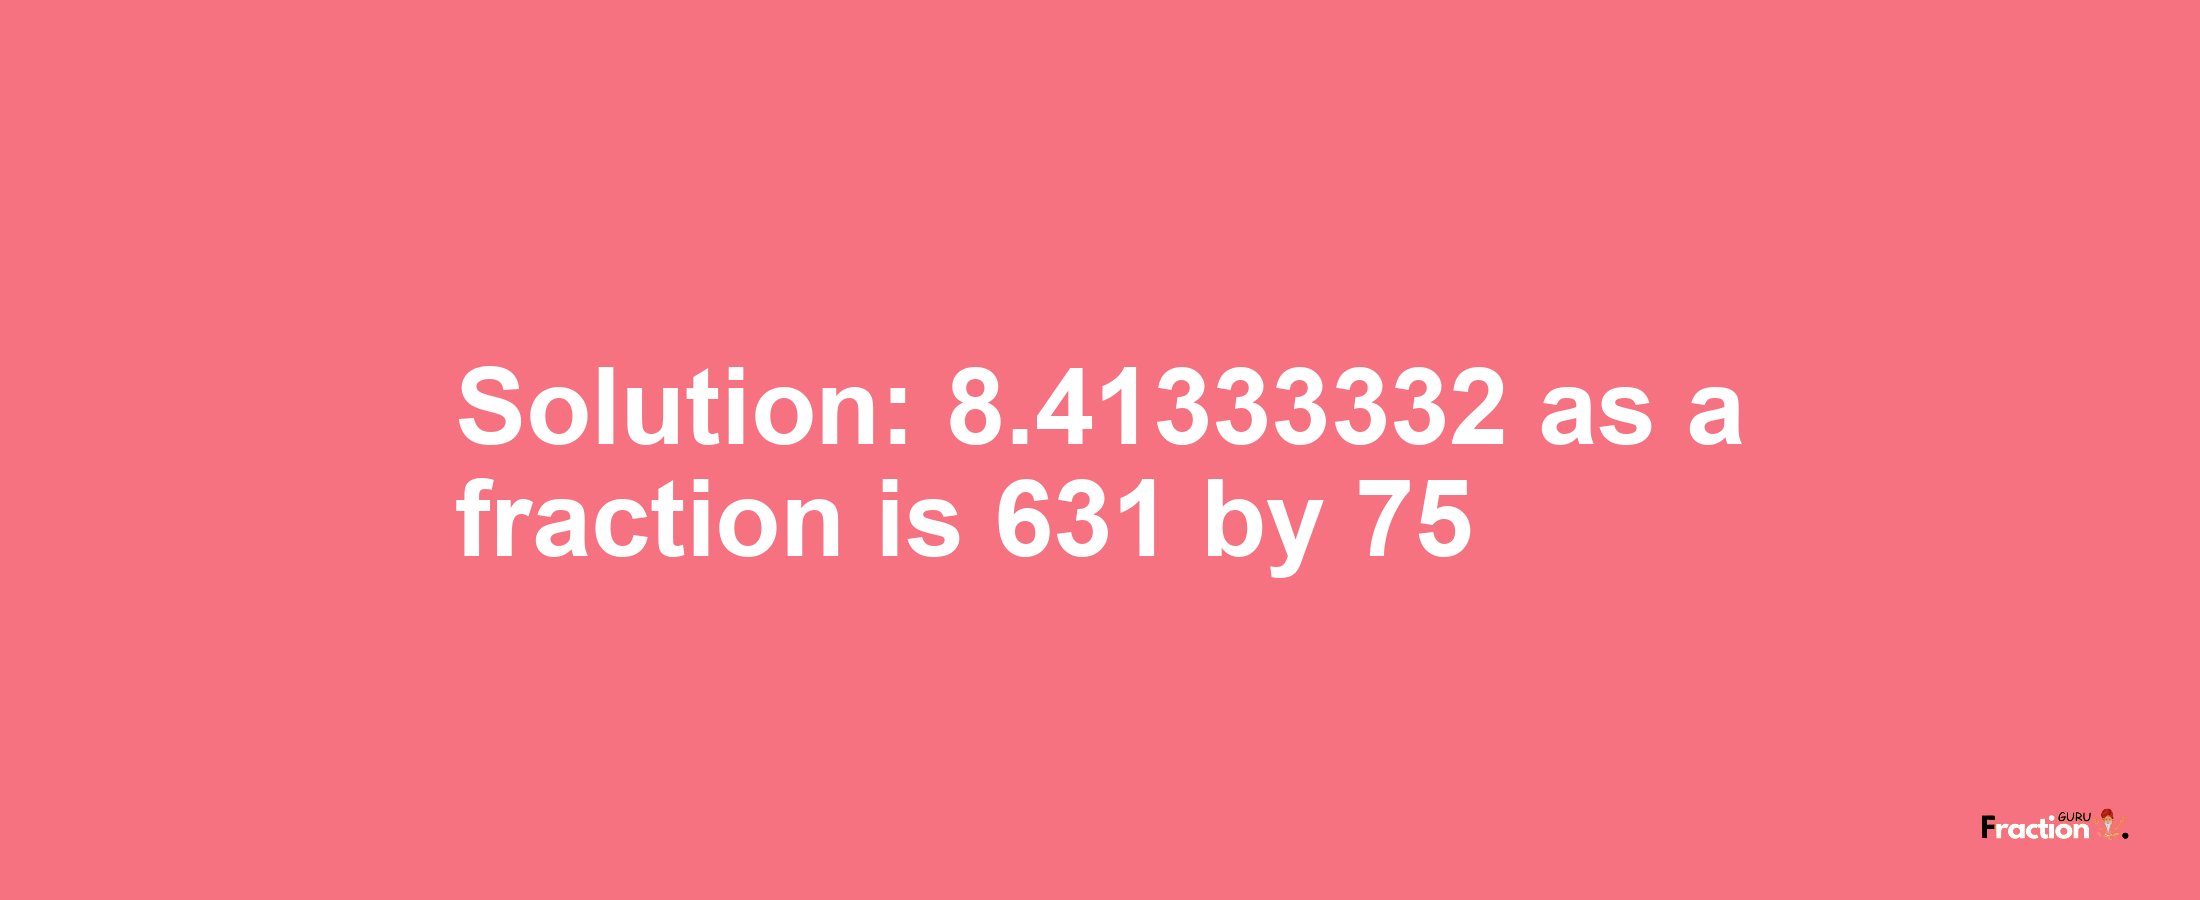 Solution:8.41333332 as a fraction is 631/75